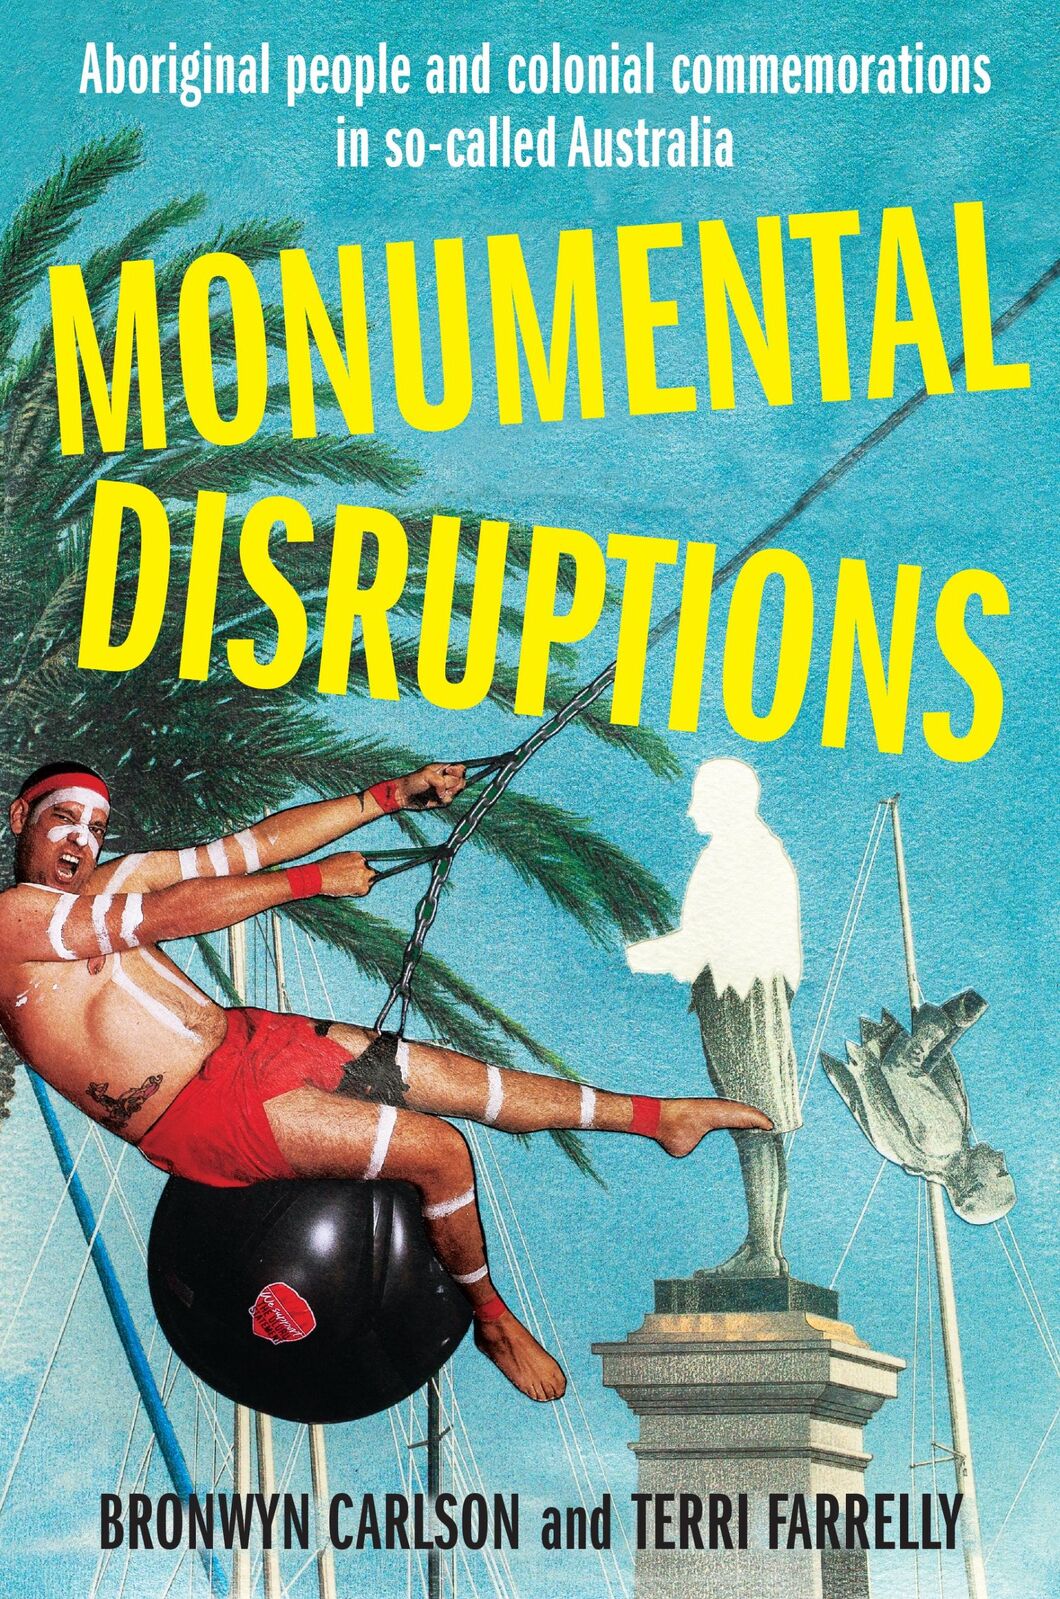 Monumental Disruptions: Aboriginal People and Colonial Commemorations in so-called Australia